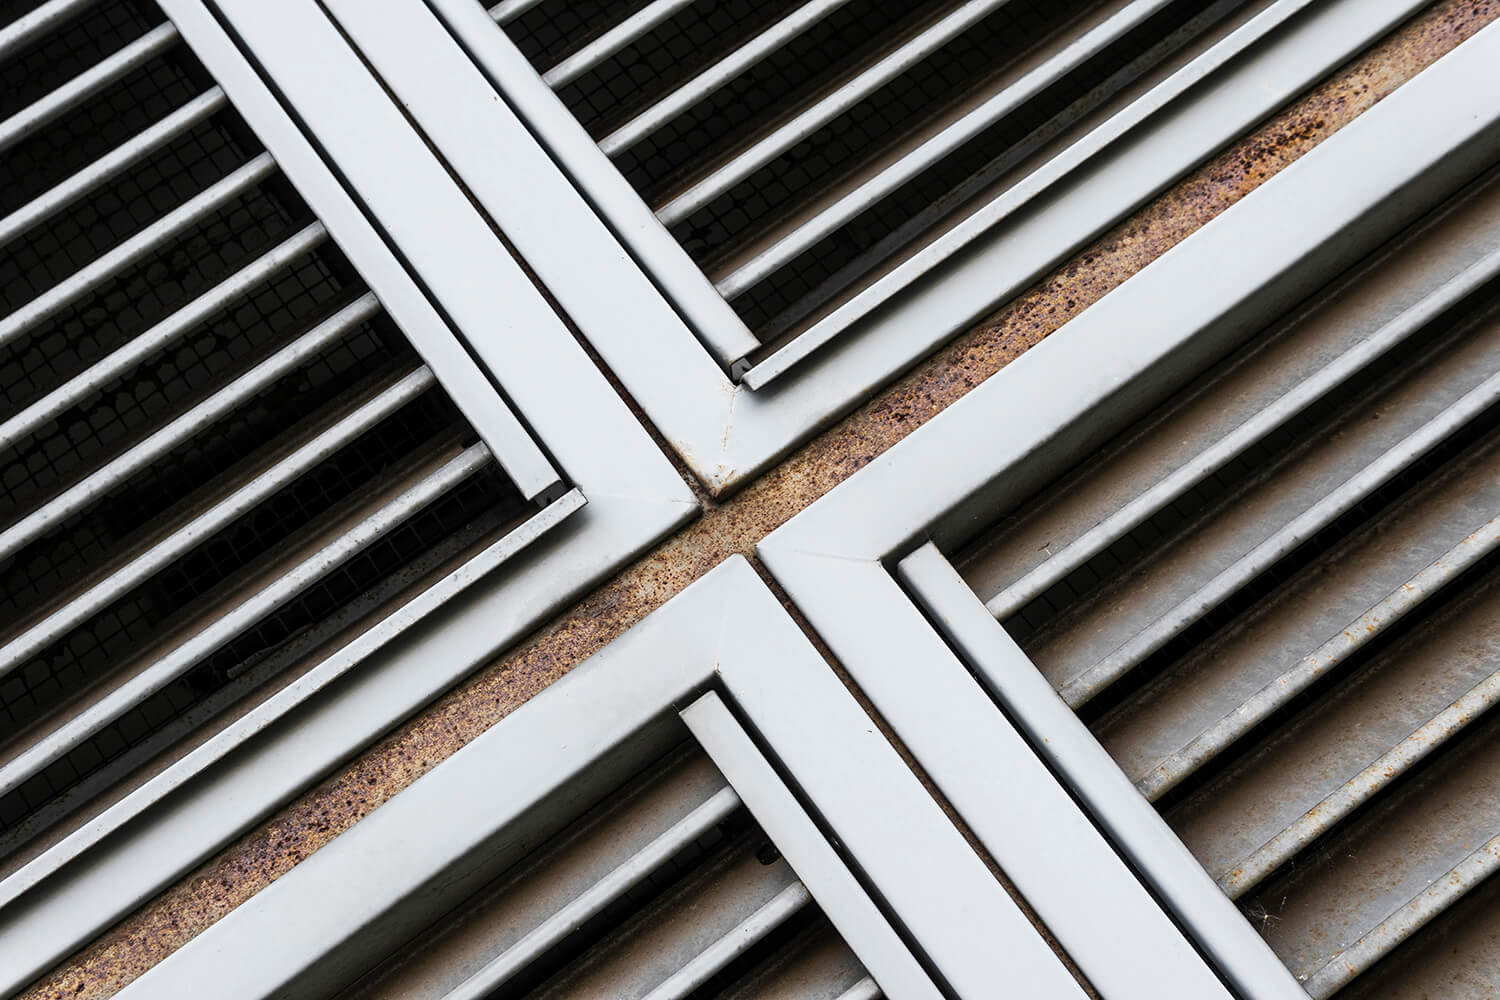 Leaky ducts are the cause of AC repair